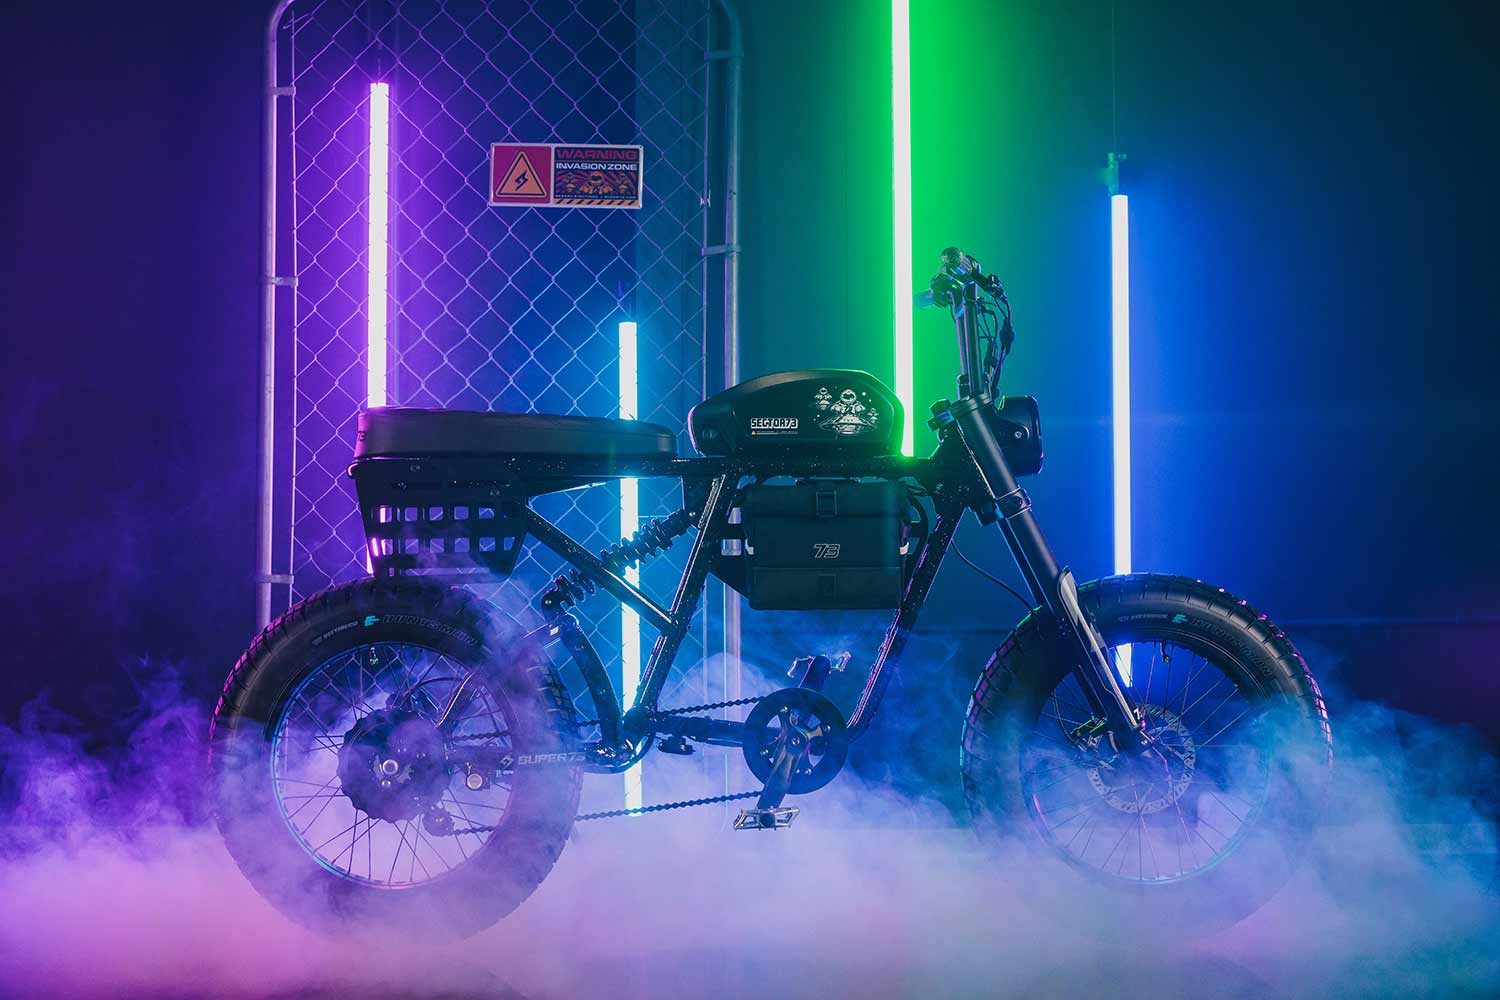 Side view image of the SECTOR73 R Brooklyn CosmicDust bike.